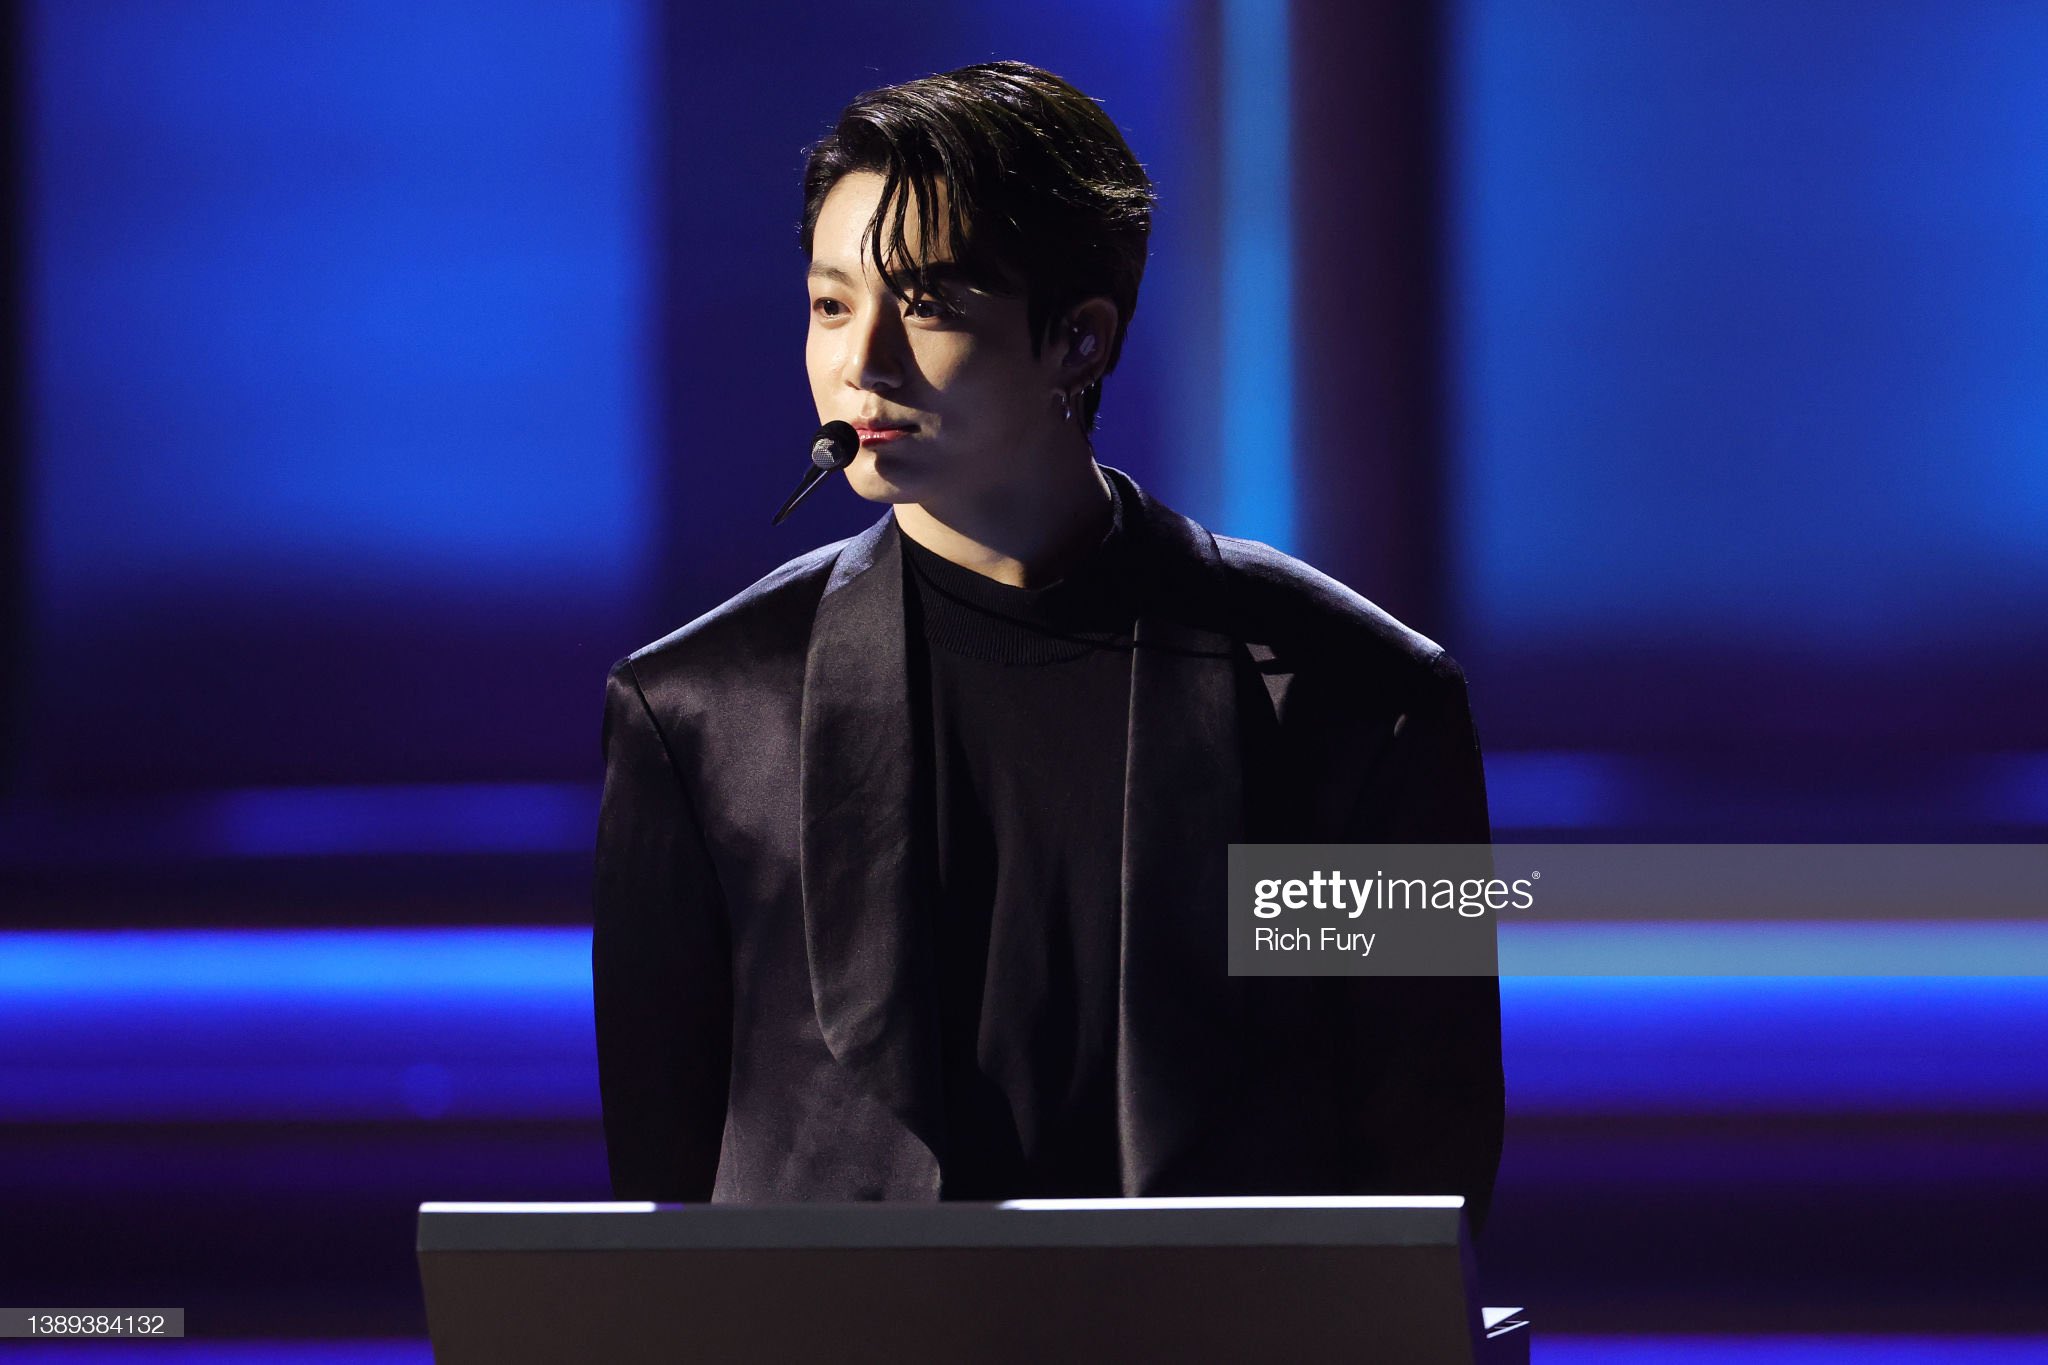 TODAY on X: Jungkook. That's the tweet. #BTS #GRAMMYs 📸: Getty Images   / X